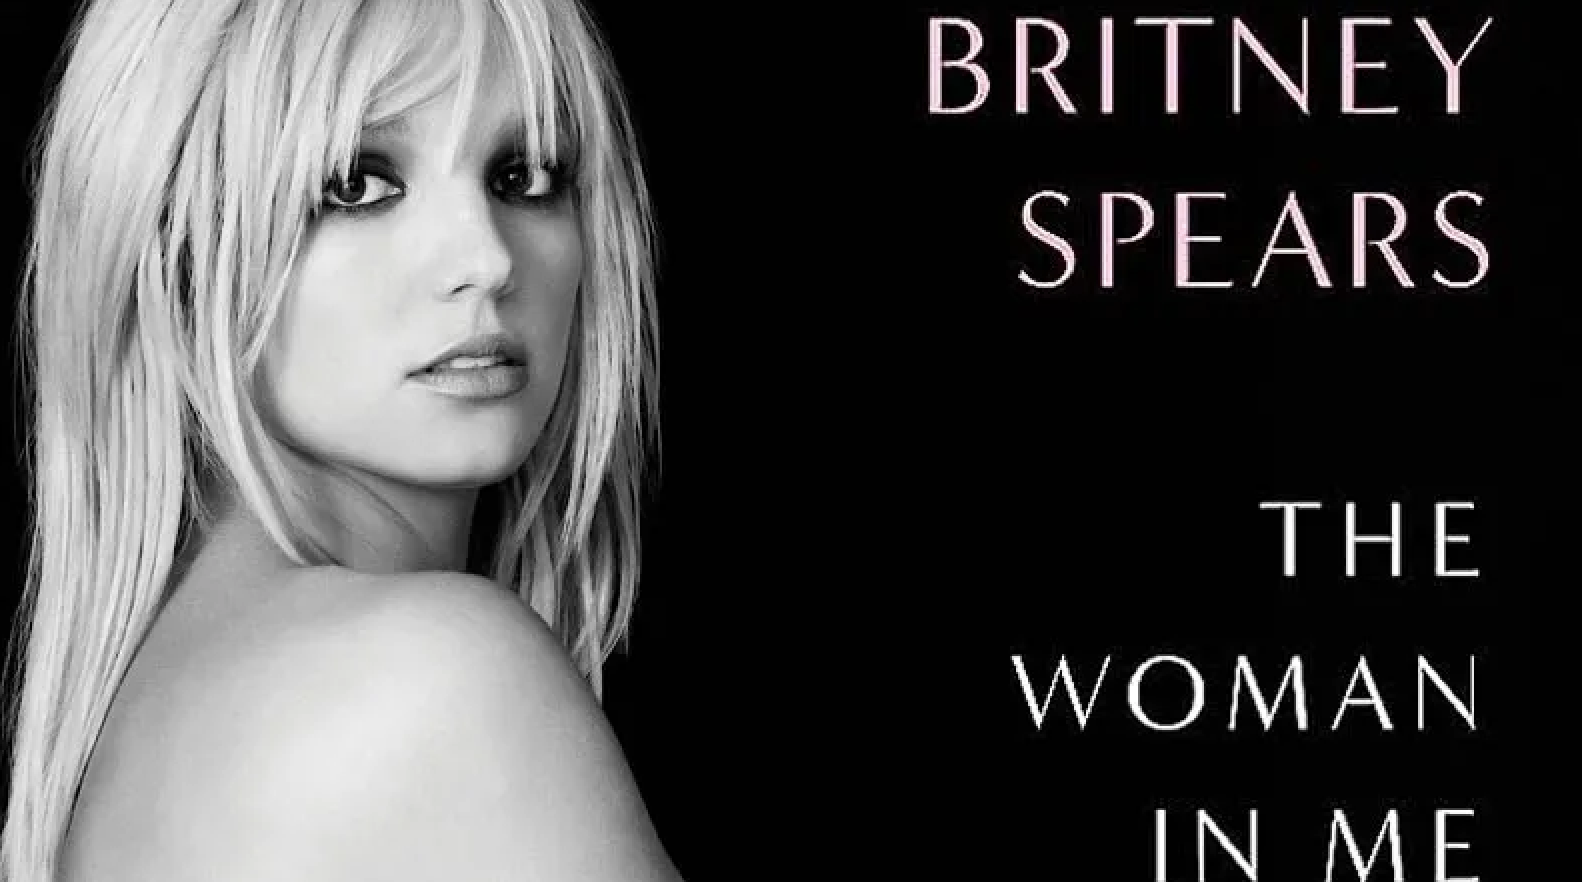 Britney Spears - The woman in me - autobiographie -